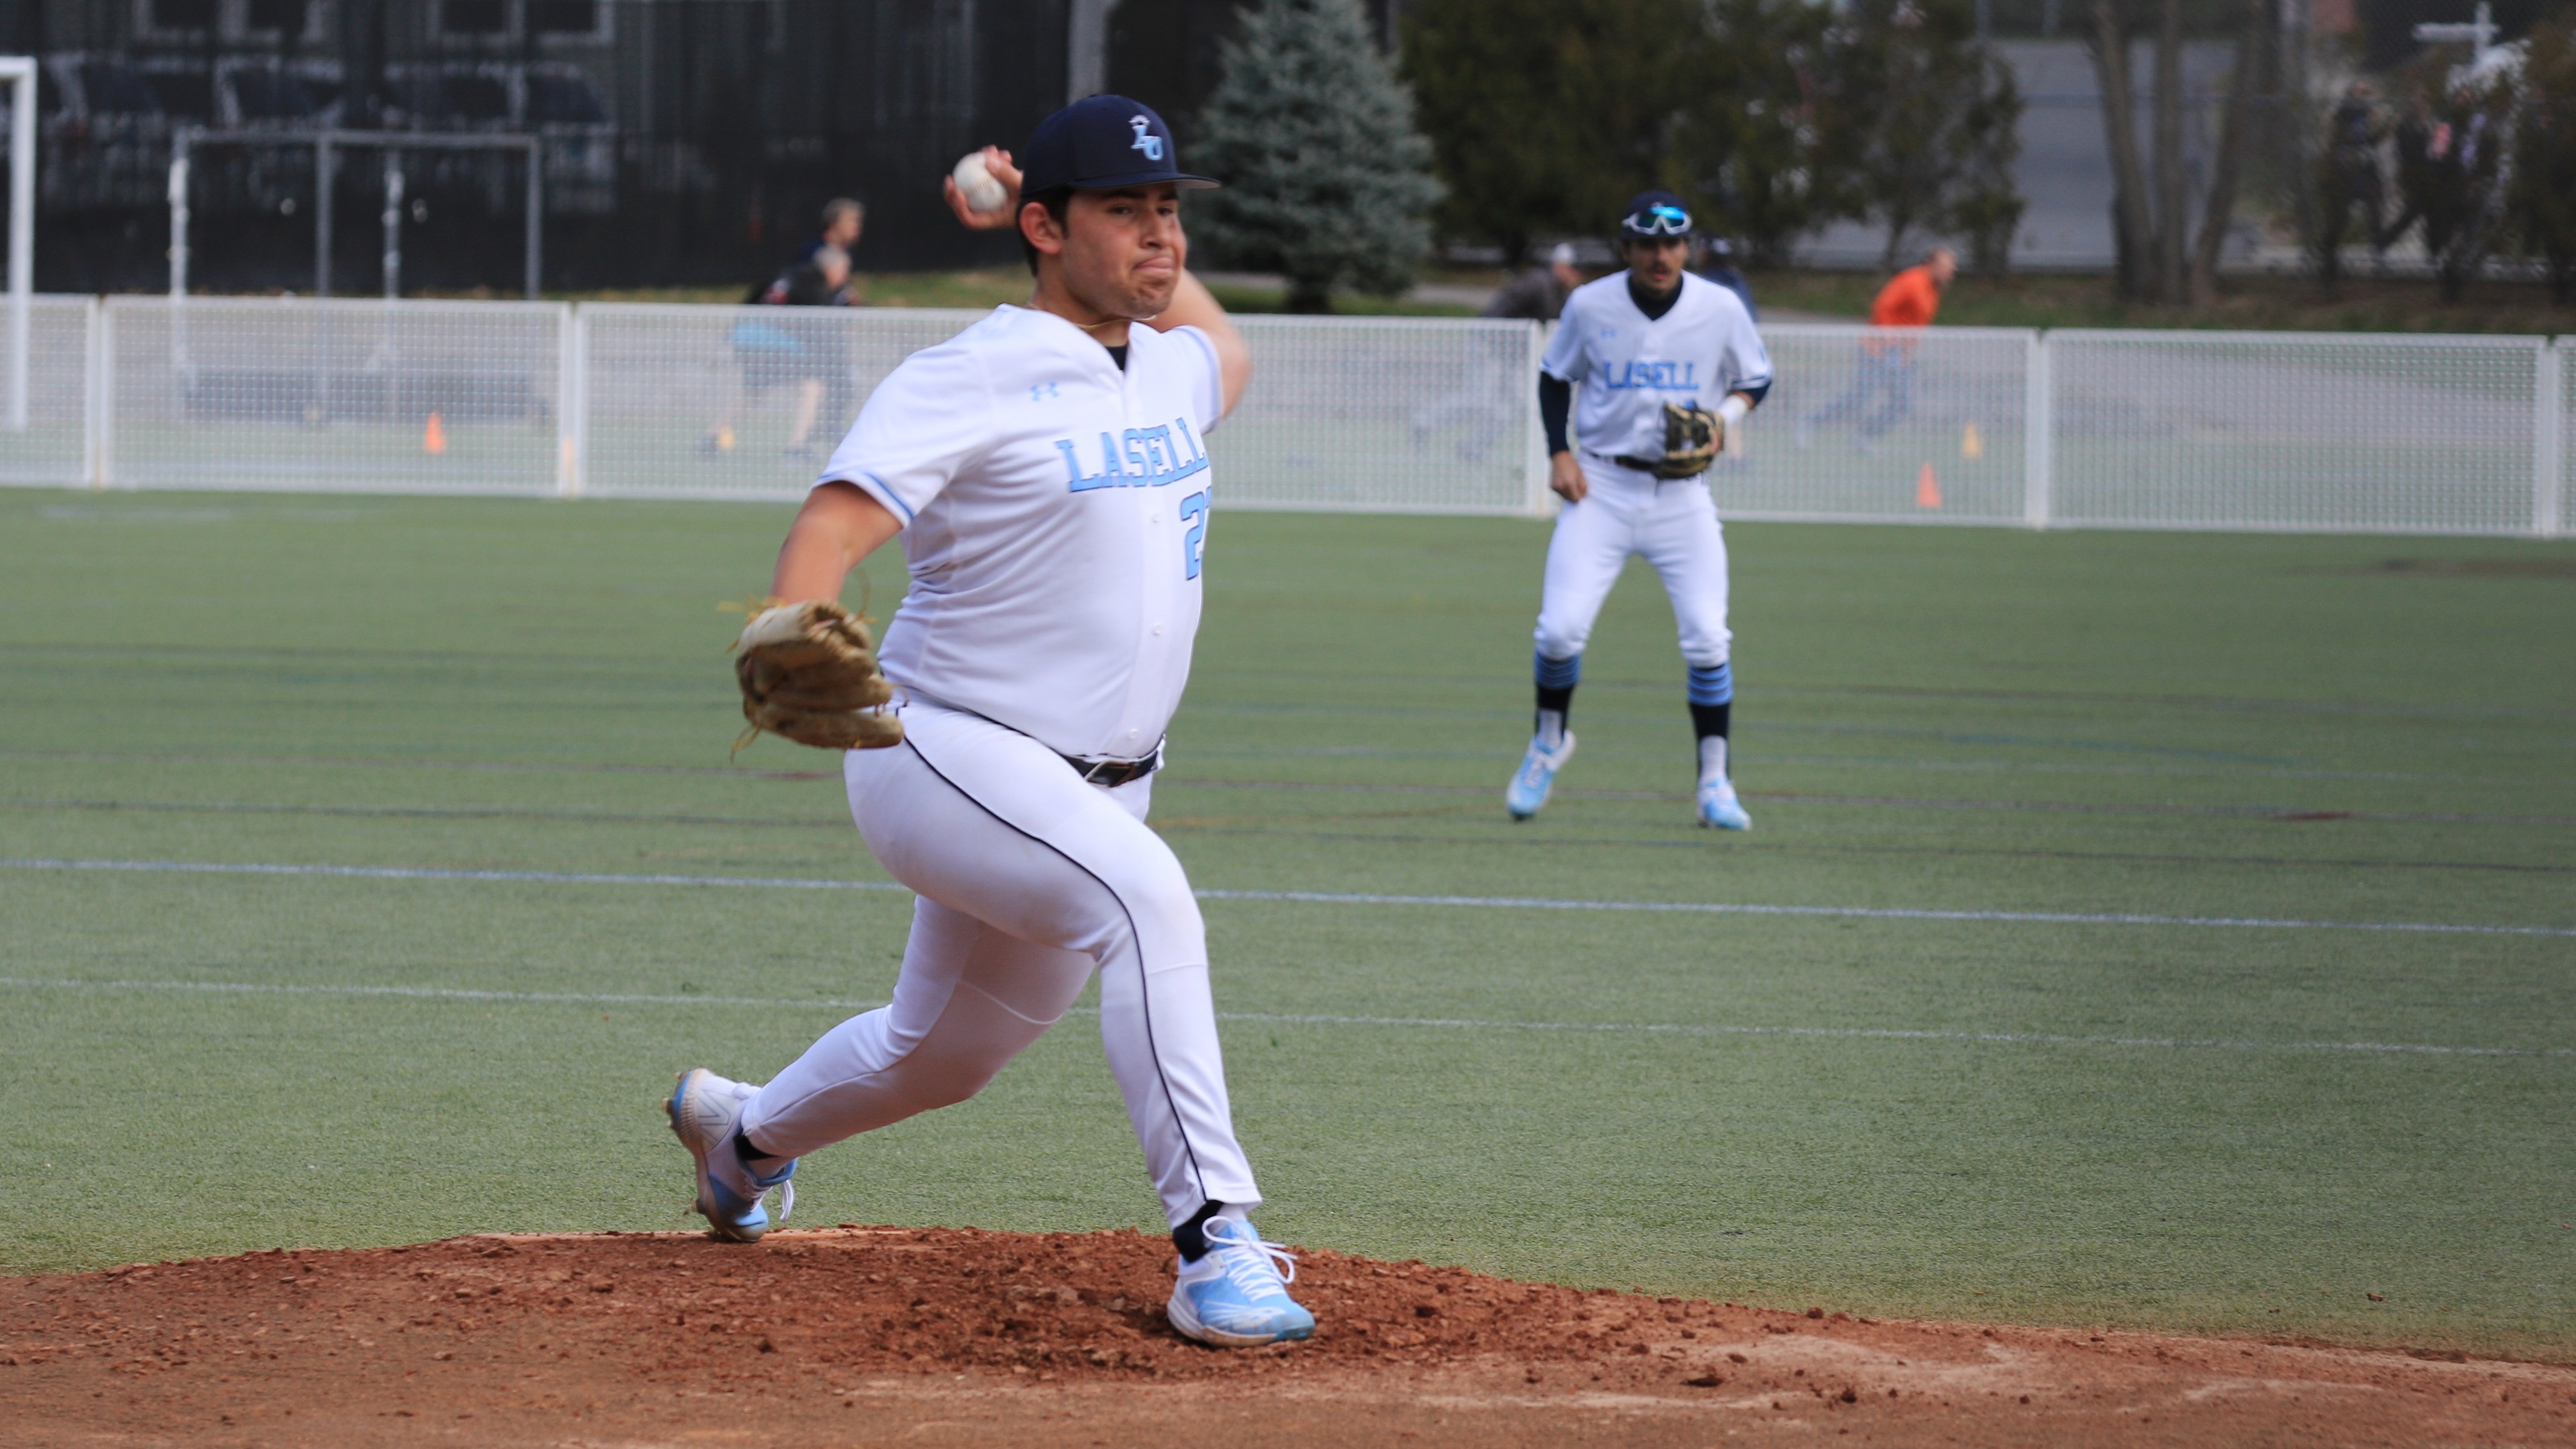 Baseball: Lasell moves to above .500 for the first time this season following sweep of Lesley